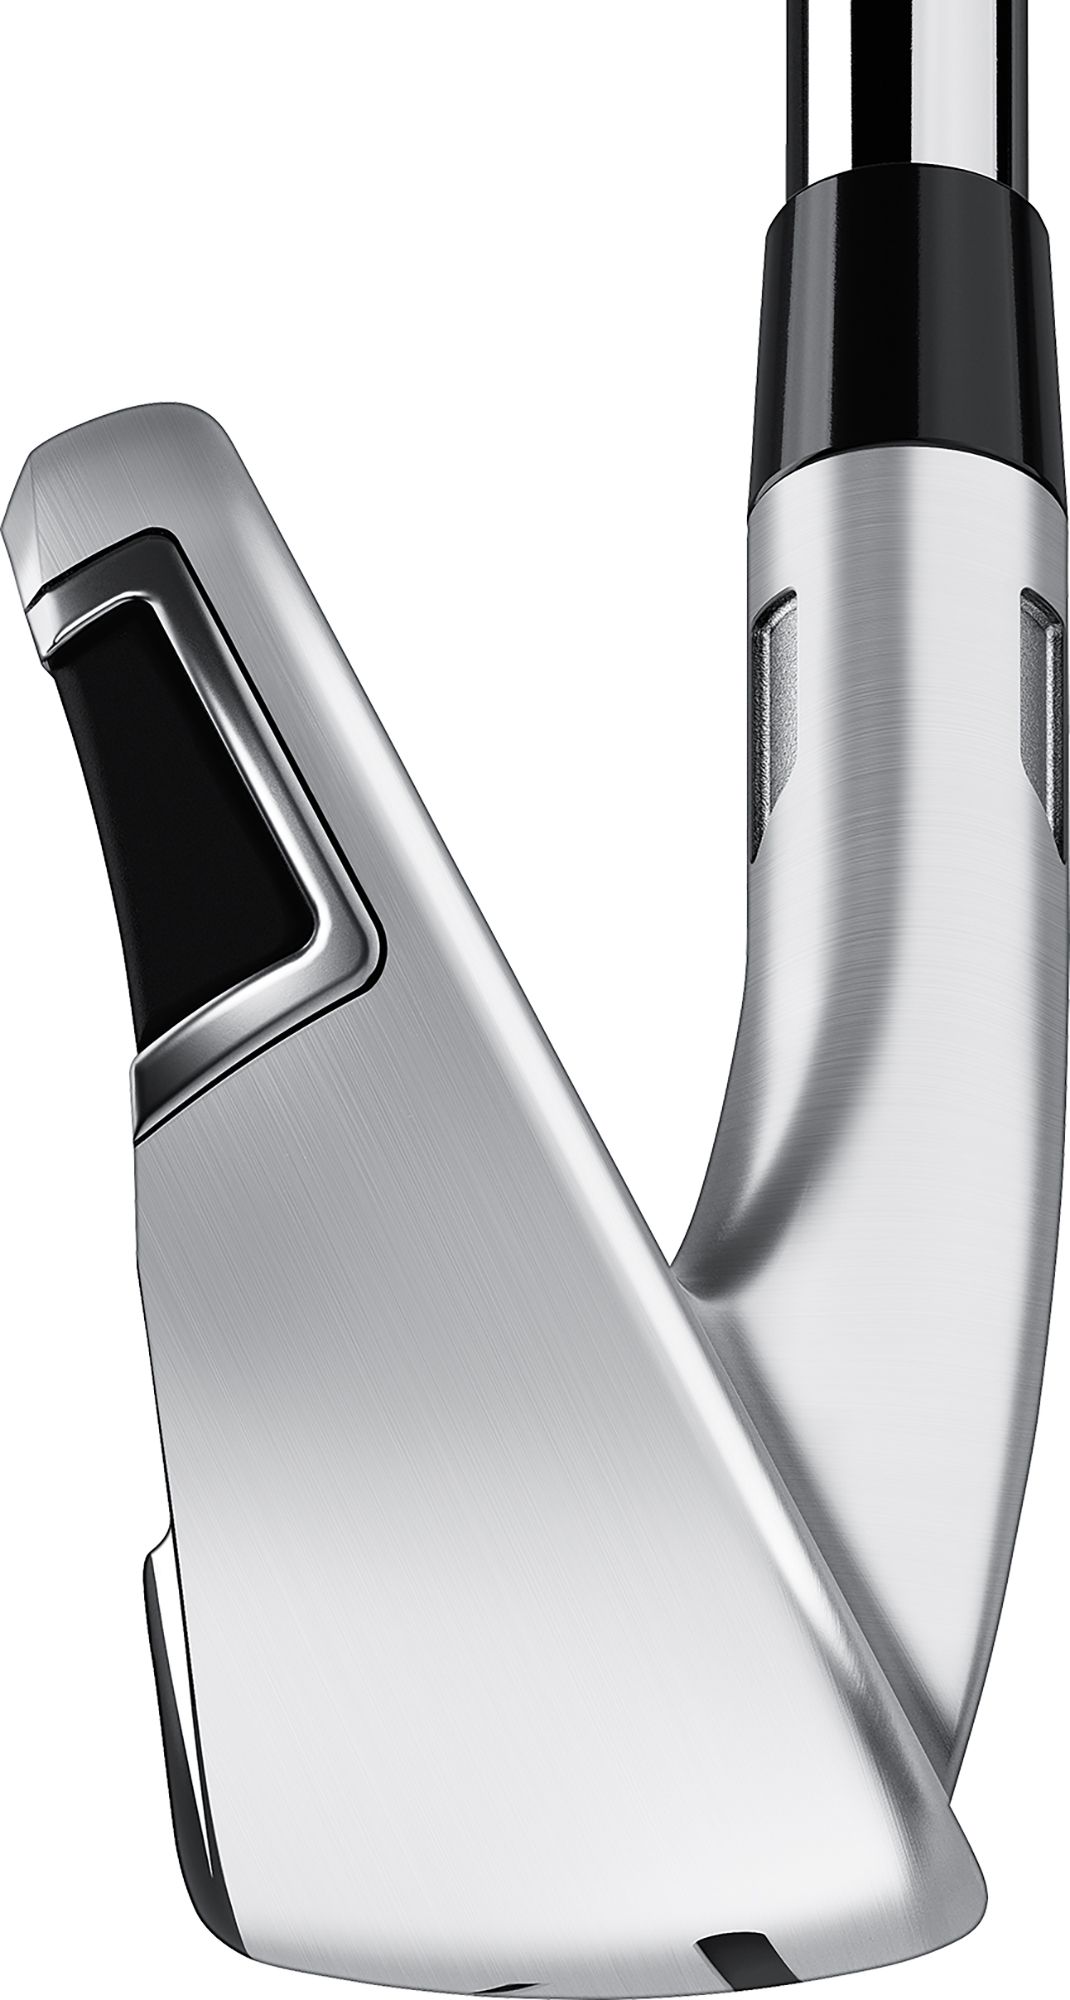 TaylorMade Qi HL Irons